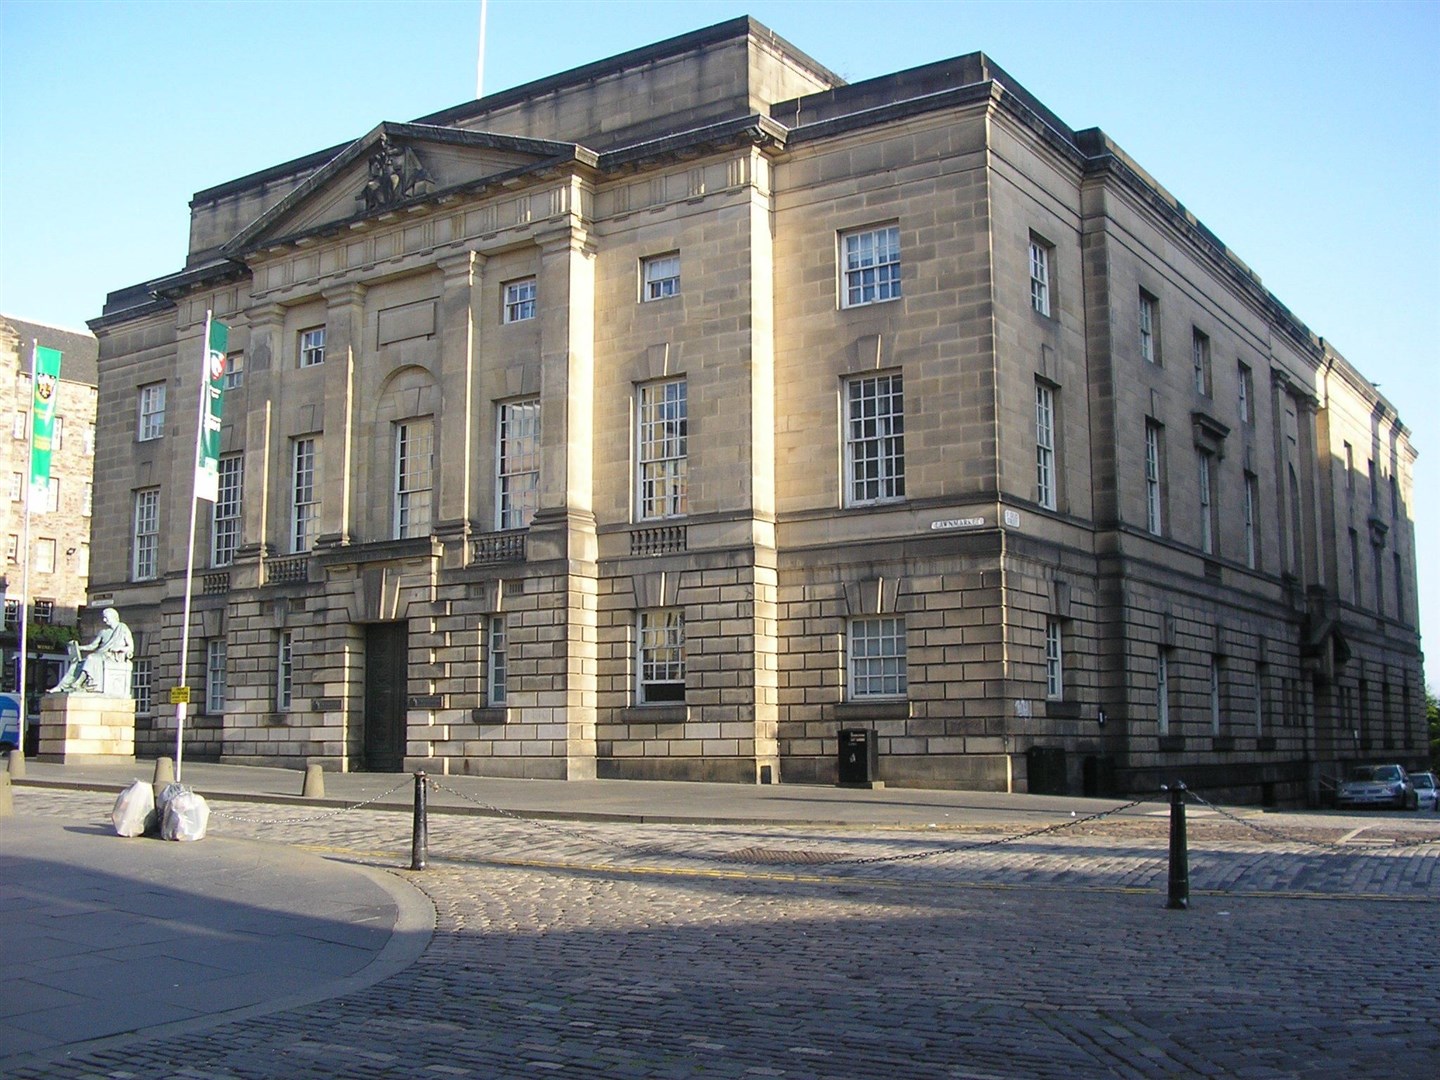 During a hearing at the High Court in Edinburgh, lawyers agreed that Ross made £9,085.00 from his life of crime.